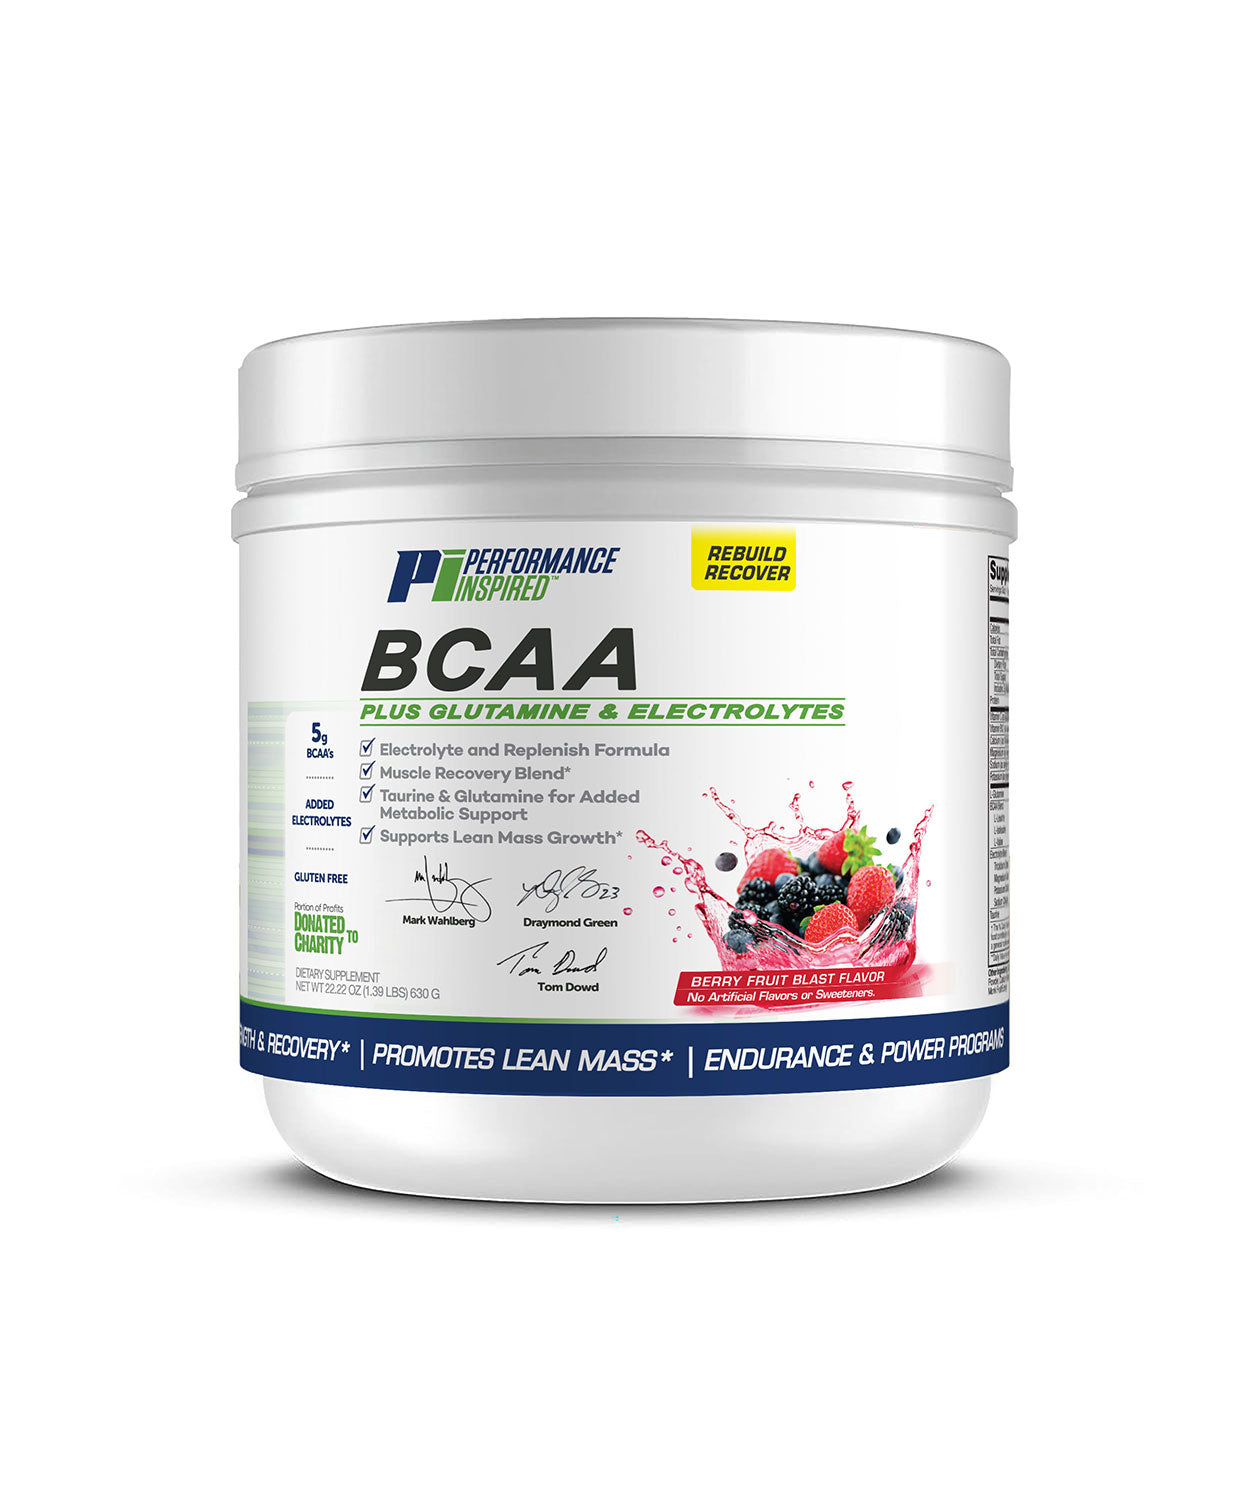 best workout supplements, best whey isolate in india, india's best whey protein, performance whey protein, whey protein shake, plant based protein powder, best mass gainer in india, pre workout energy drink, best bcaa supplements, best creatine monohydrate